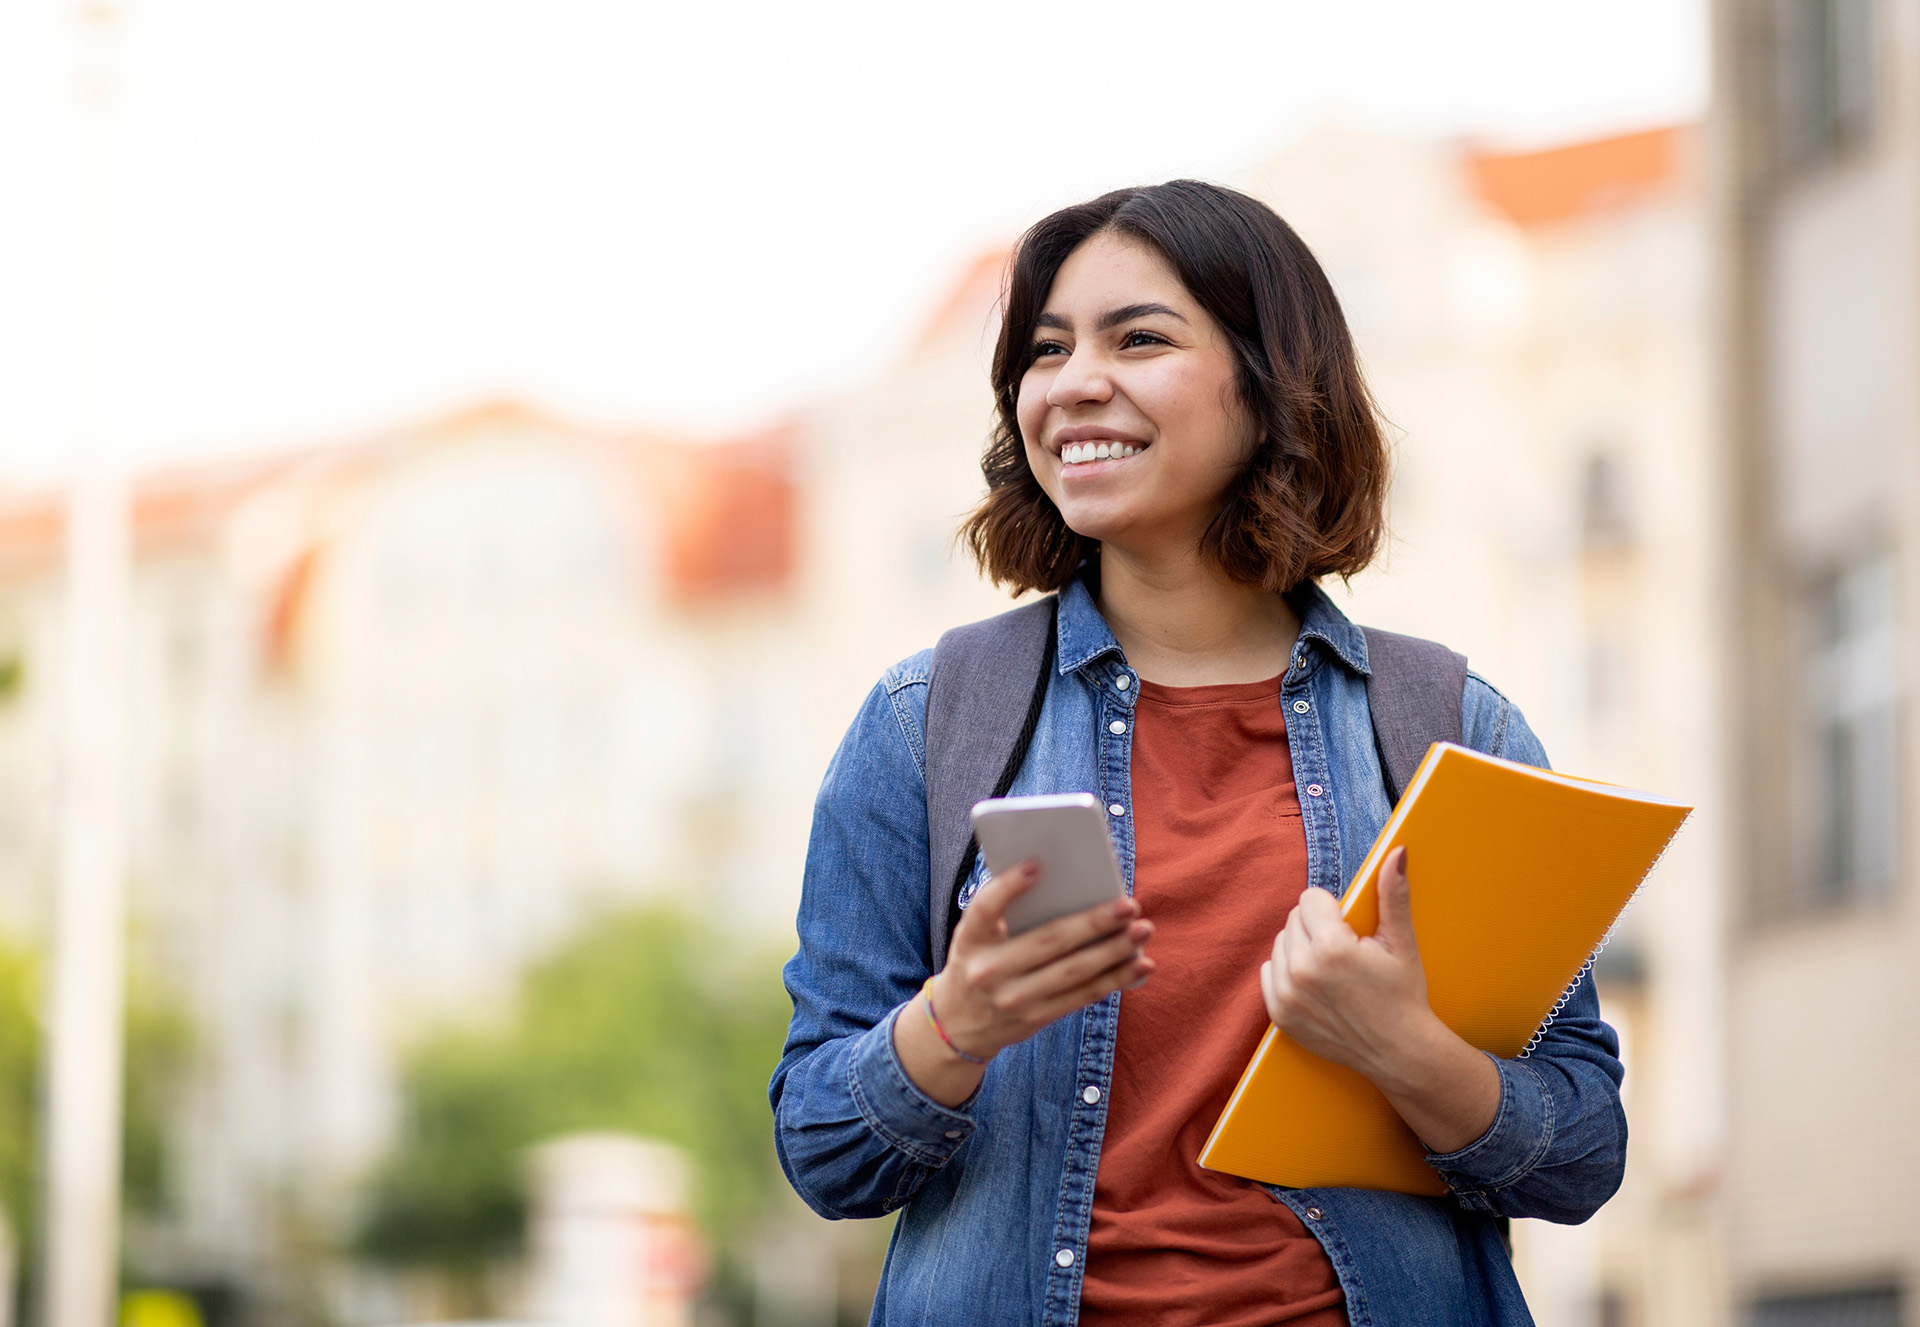 Cheerful middle eastern female student with smartphone and workbooks standing outdoors.